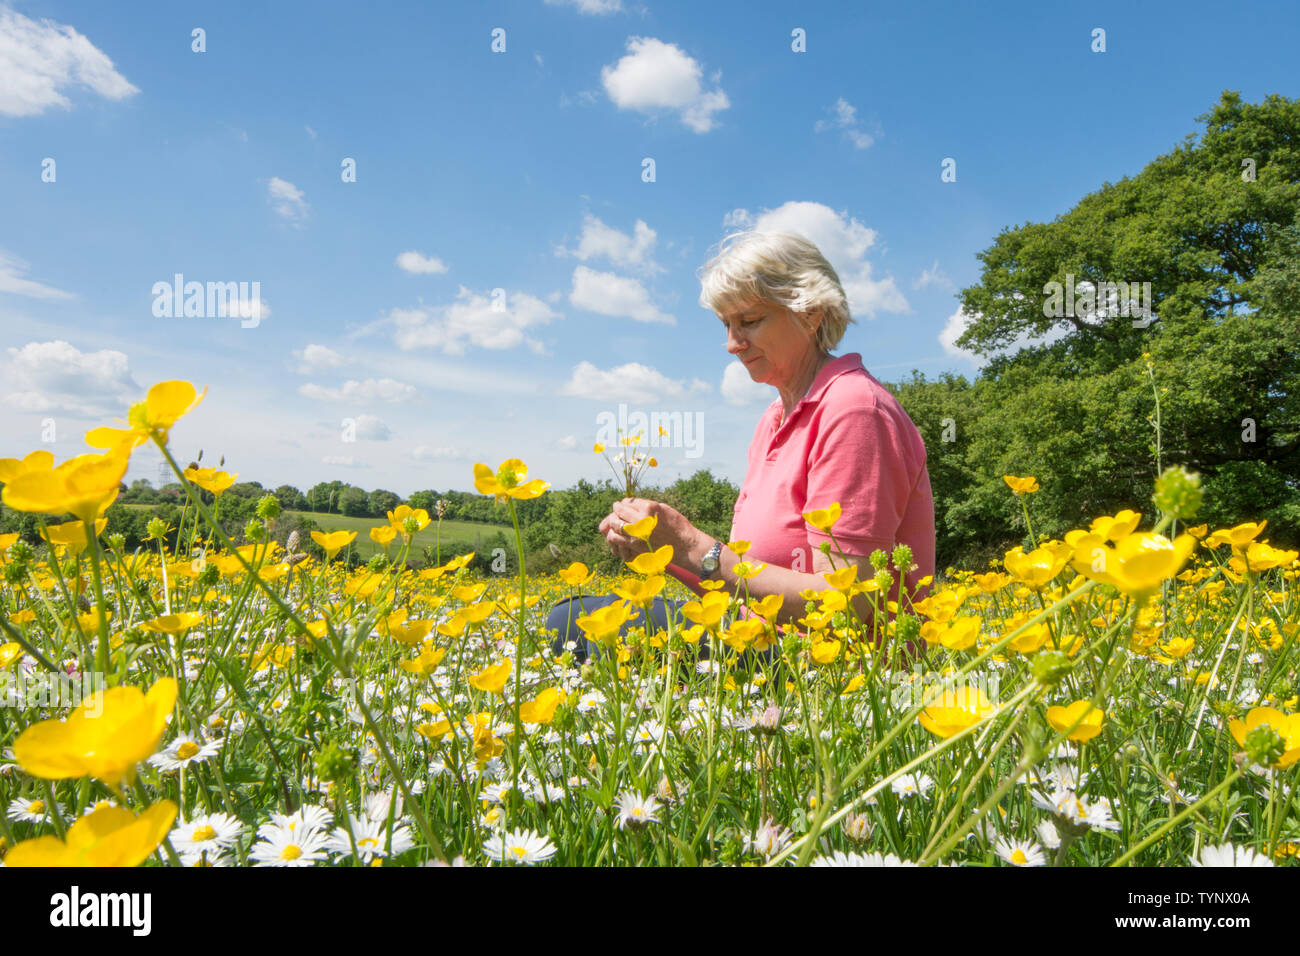 woman sitting in a wild flower meadow, Bulbous Buttercup, Ranunculus bulbosus, and Daisy, Bellis perennis, Essex, UK, May Stock Photo